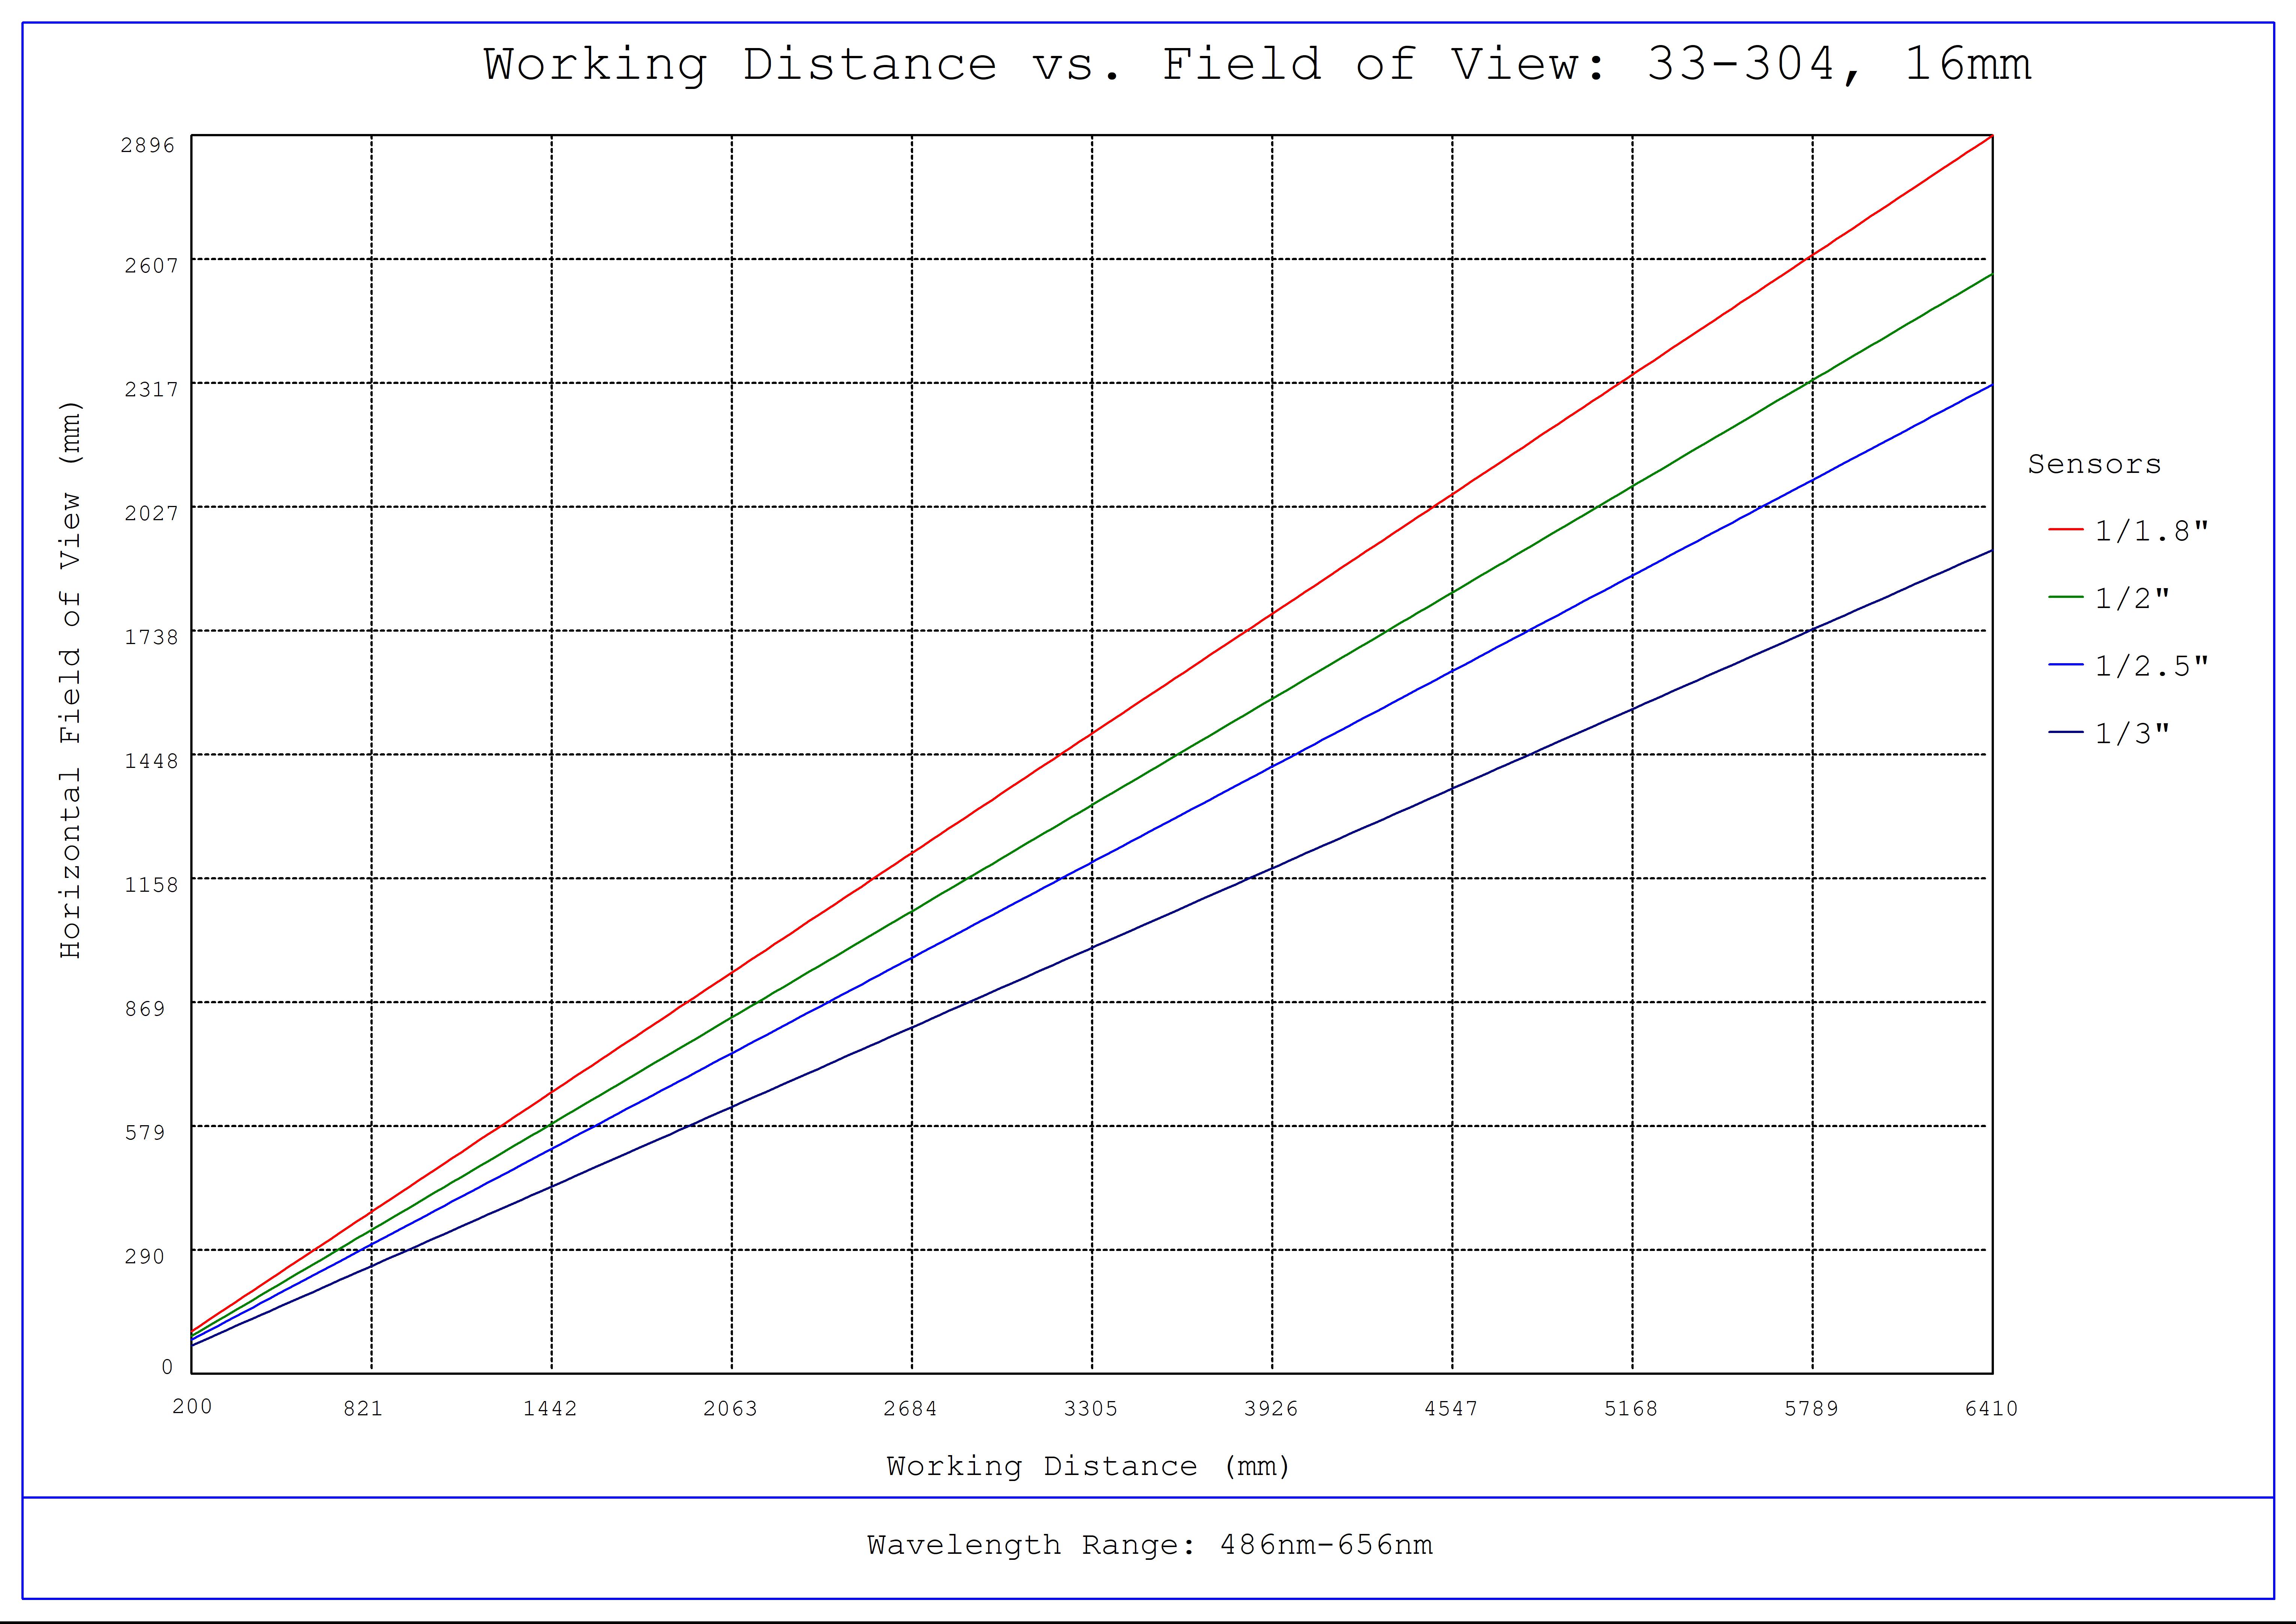 #33-304, 16mm UC Series Fixed Focal Length Lens, Working Distance versus Field of View Plot